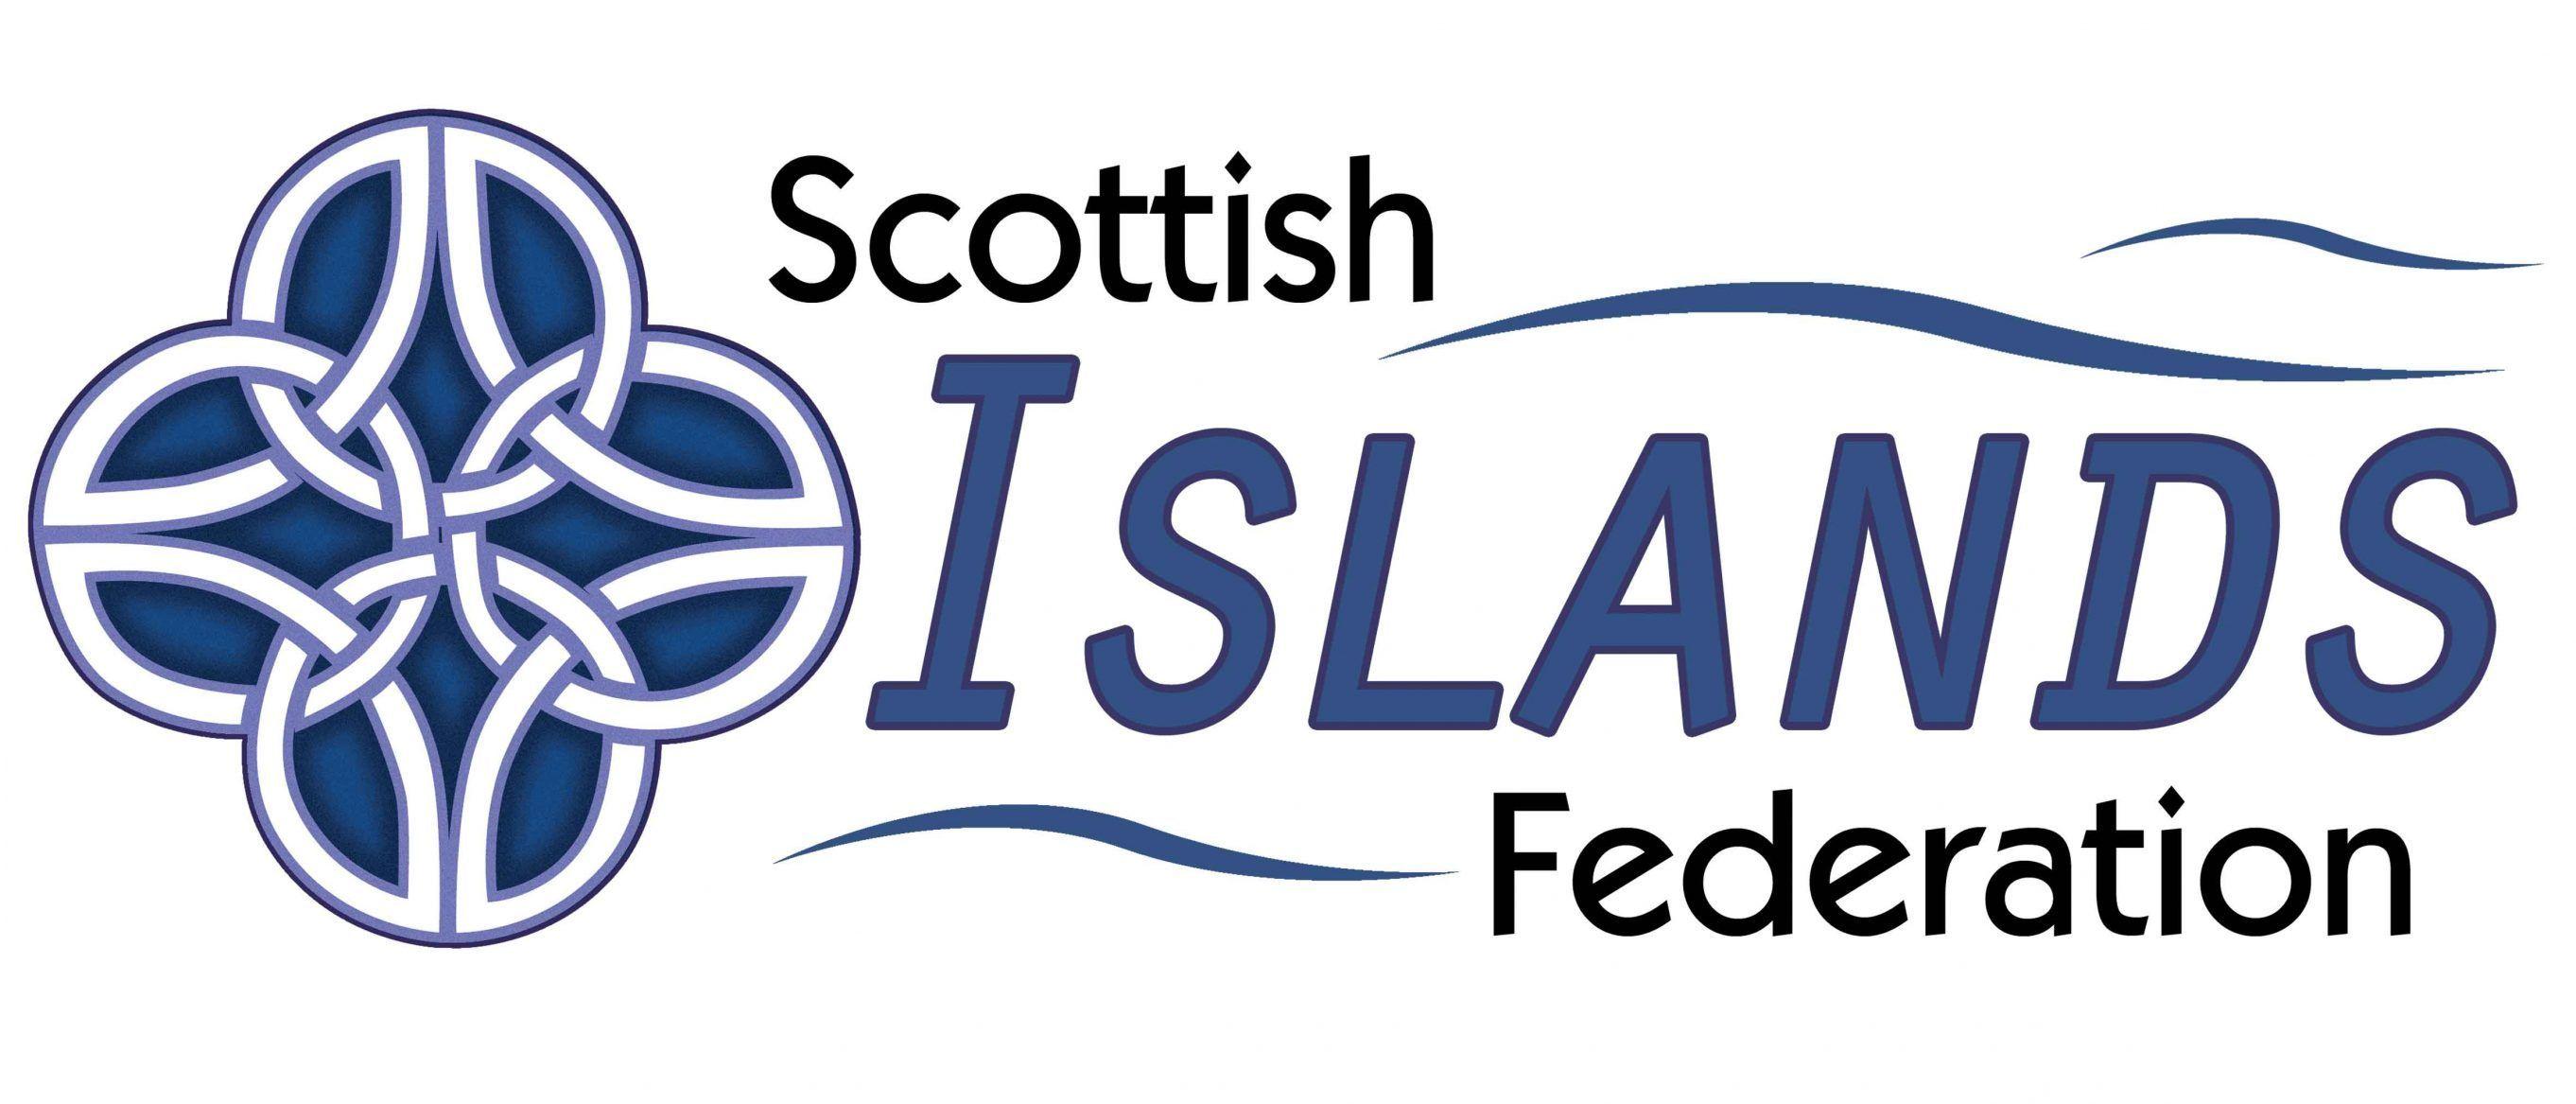 The Federation Logo - THE SCOTTISH ISLANDS FEDERATION | THE VOICE OF COMMUNITY ...